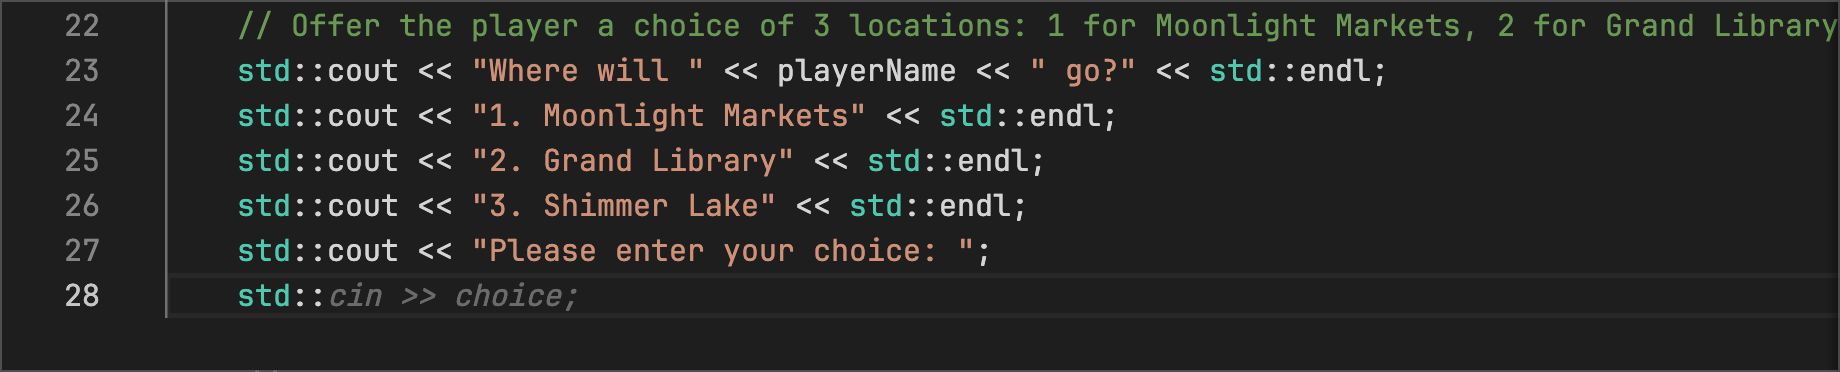 adventure.cpp - Code Suggestions suggests a multiline output for all the locations listed in the code below and asks for player input